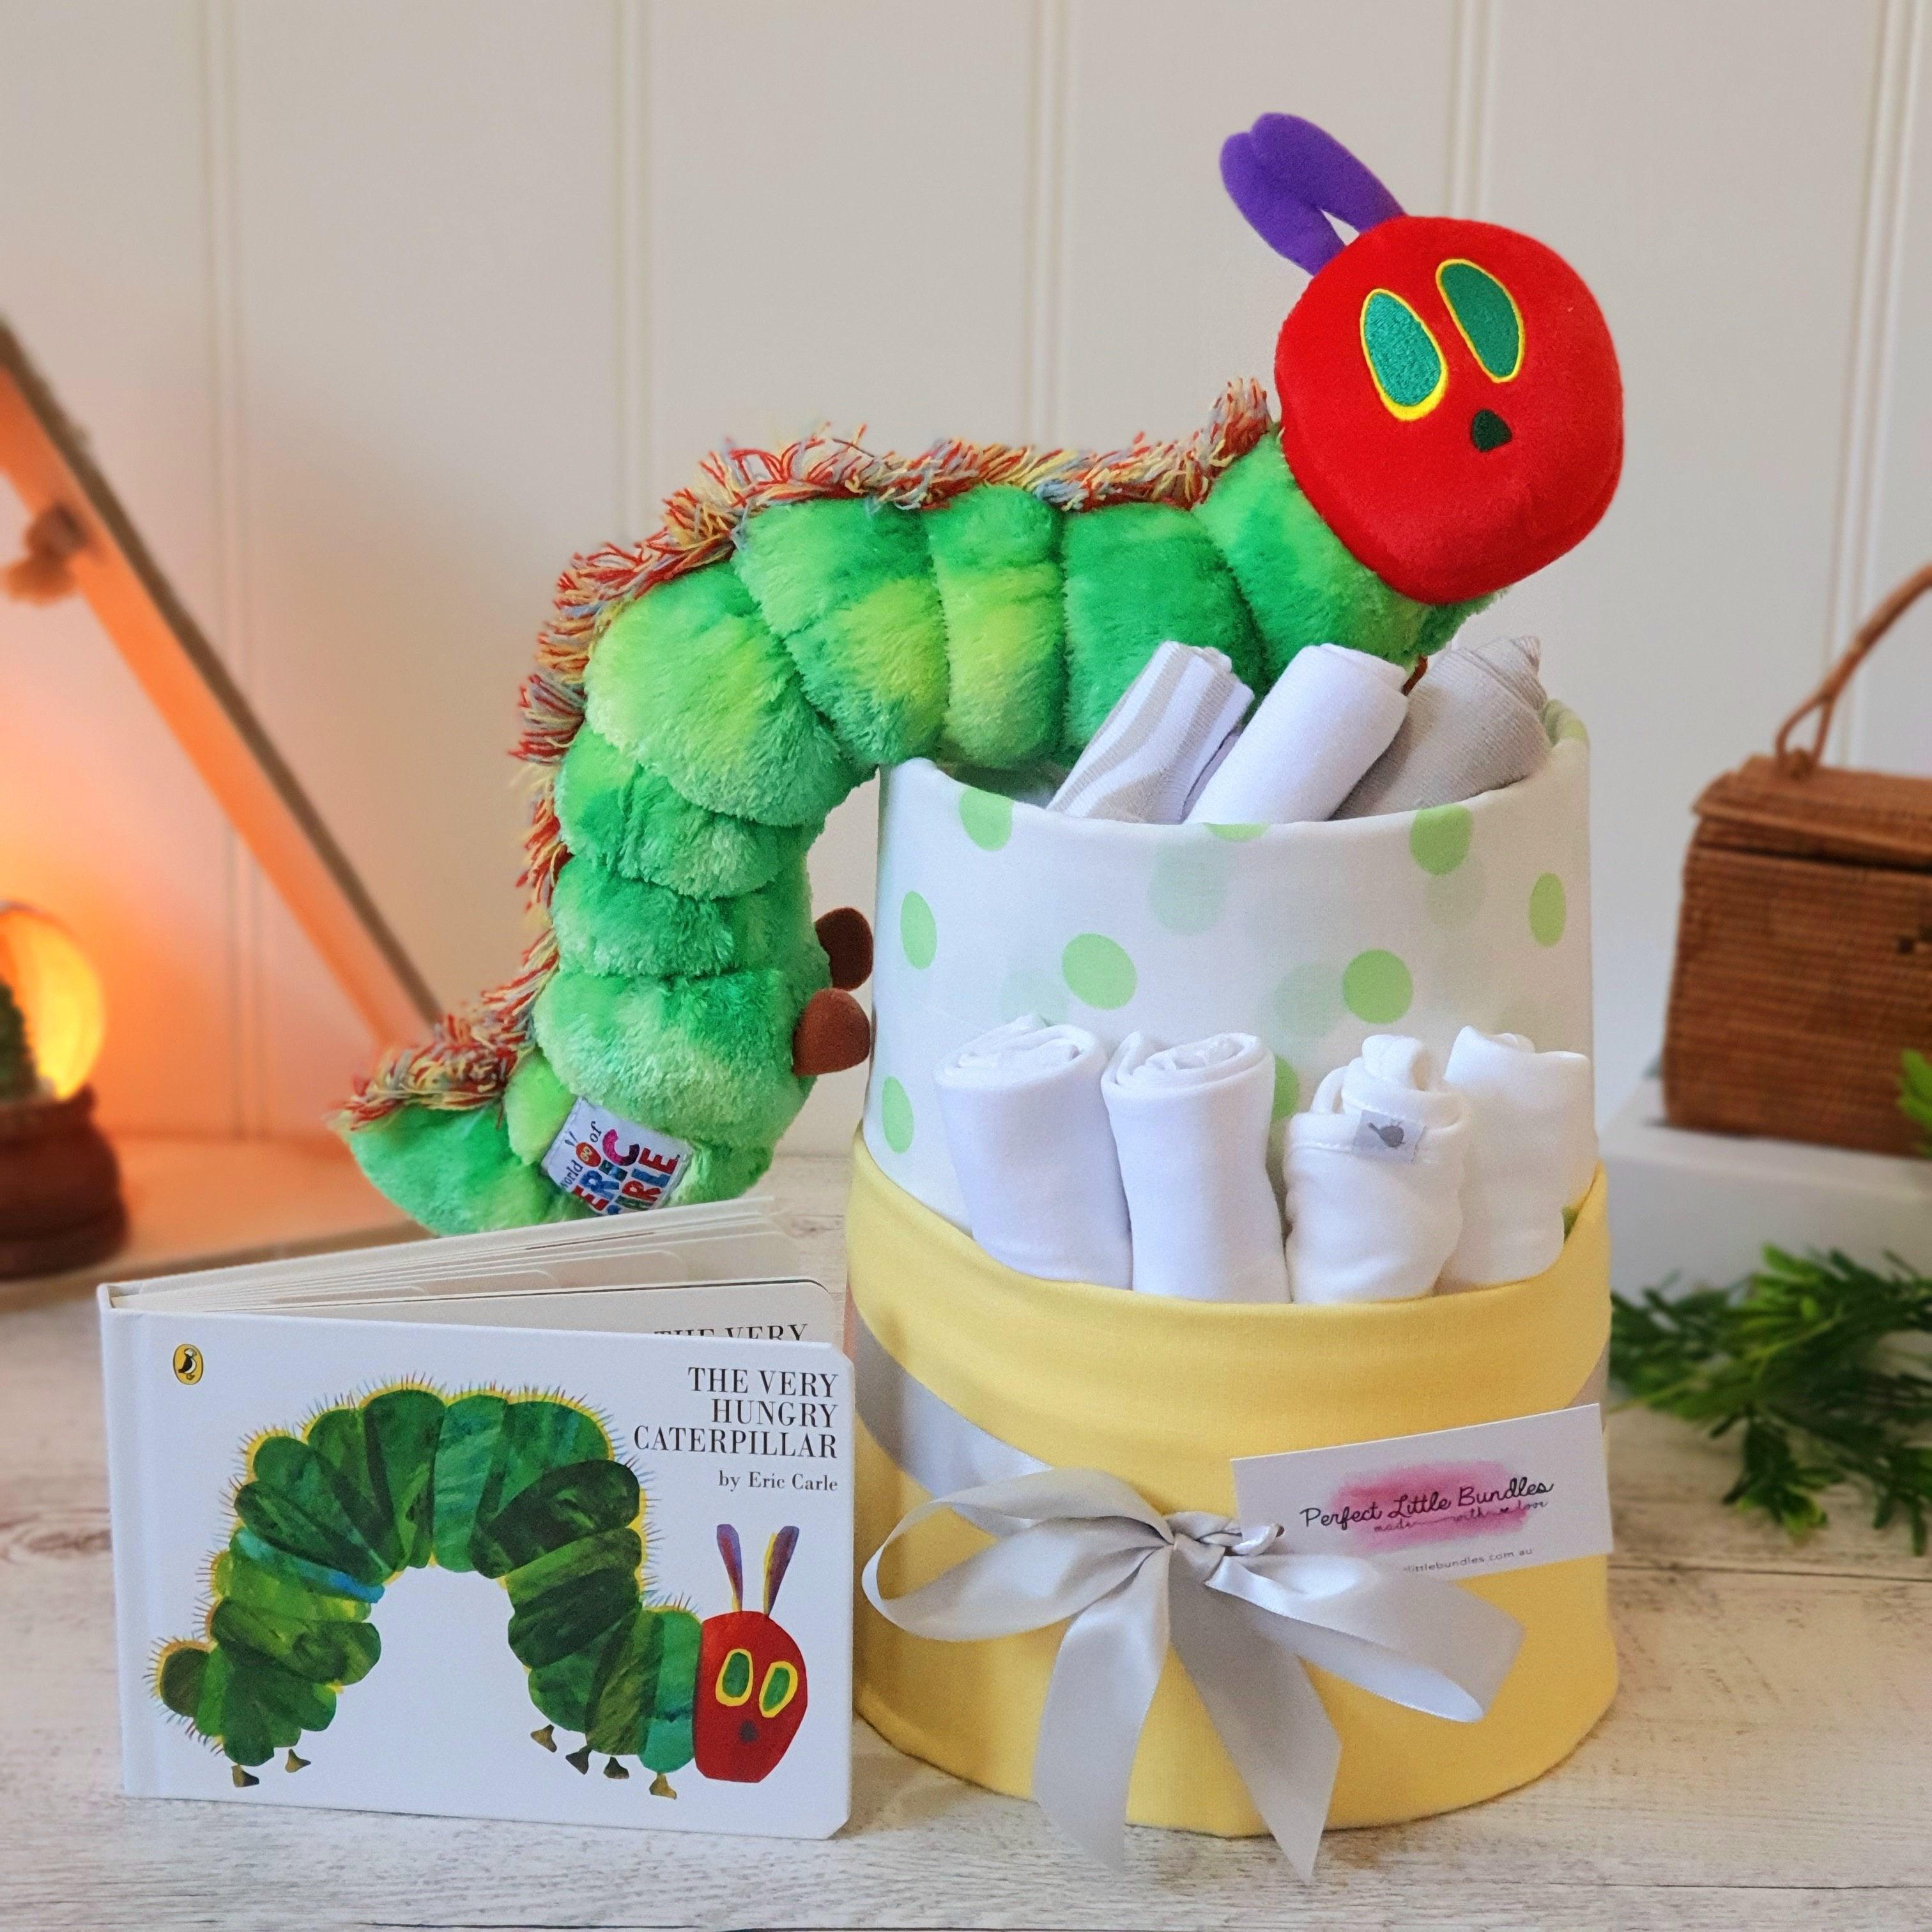 The Very Hungry Caterpillar Premium Nappy Cake - Perfect Little Bundles